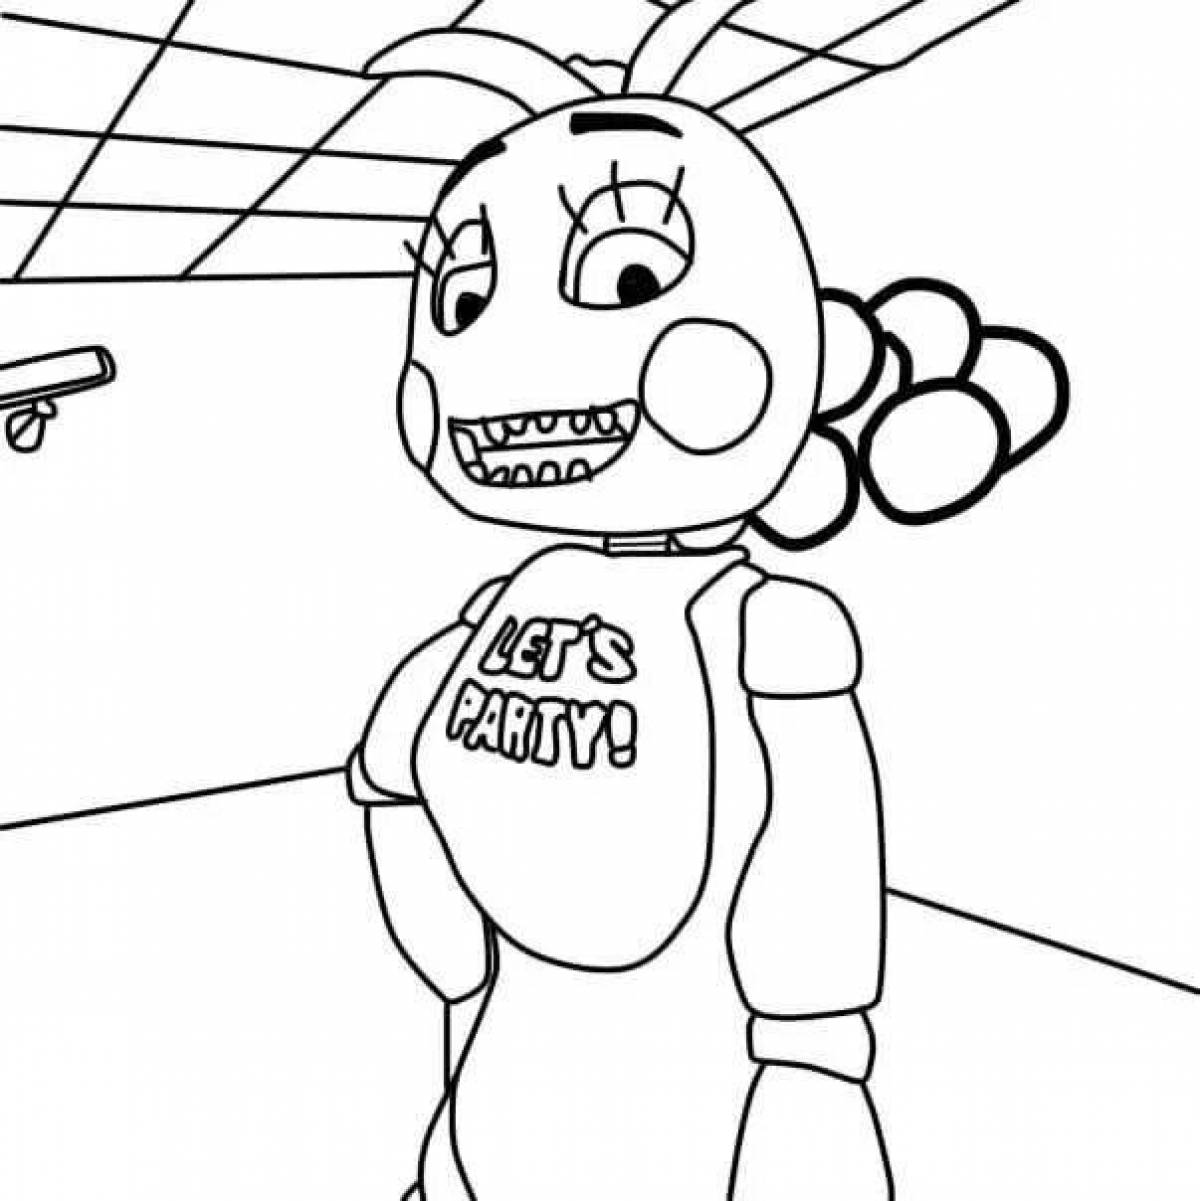 Creative chica fnaf 9 coloring book